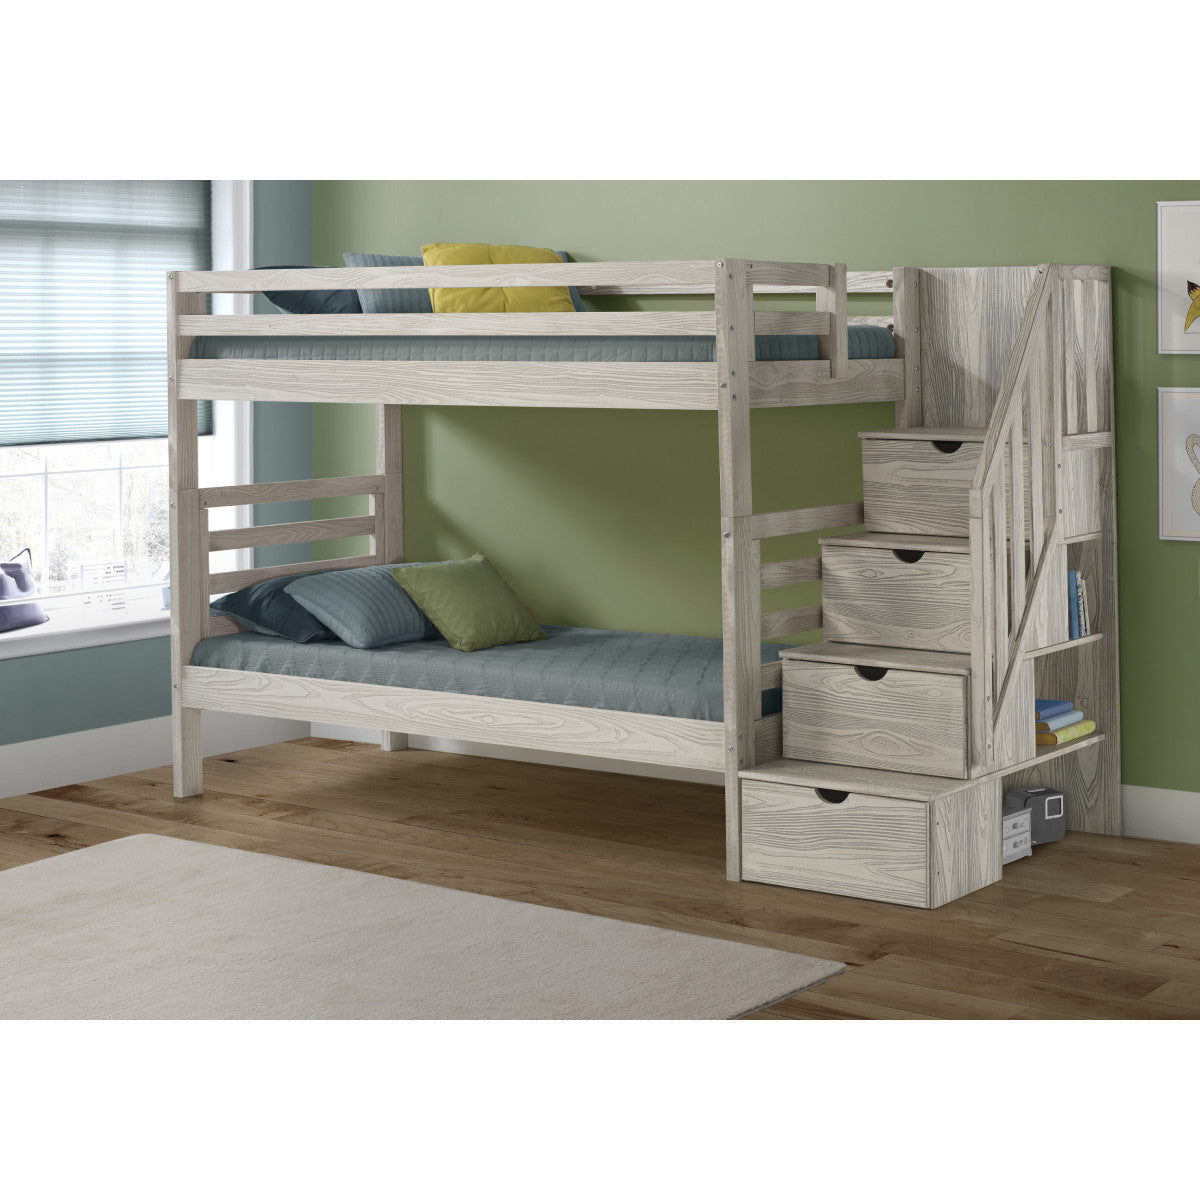 TWIN/TWIN STAIRWAY BUNK BED EMBOSSED IN ICE GREY FINISH